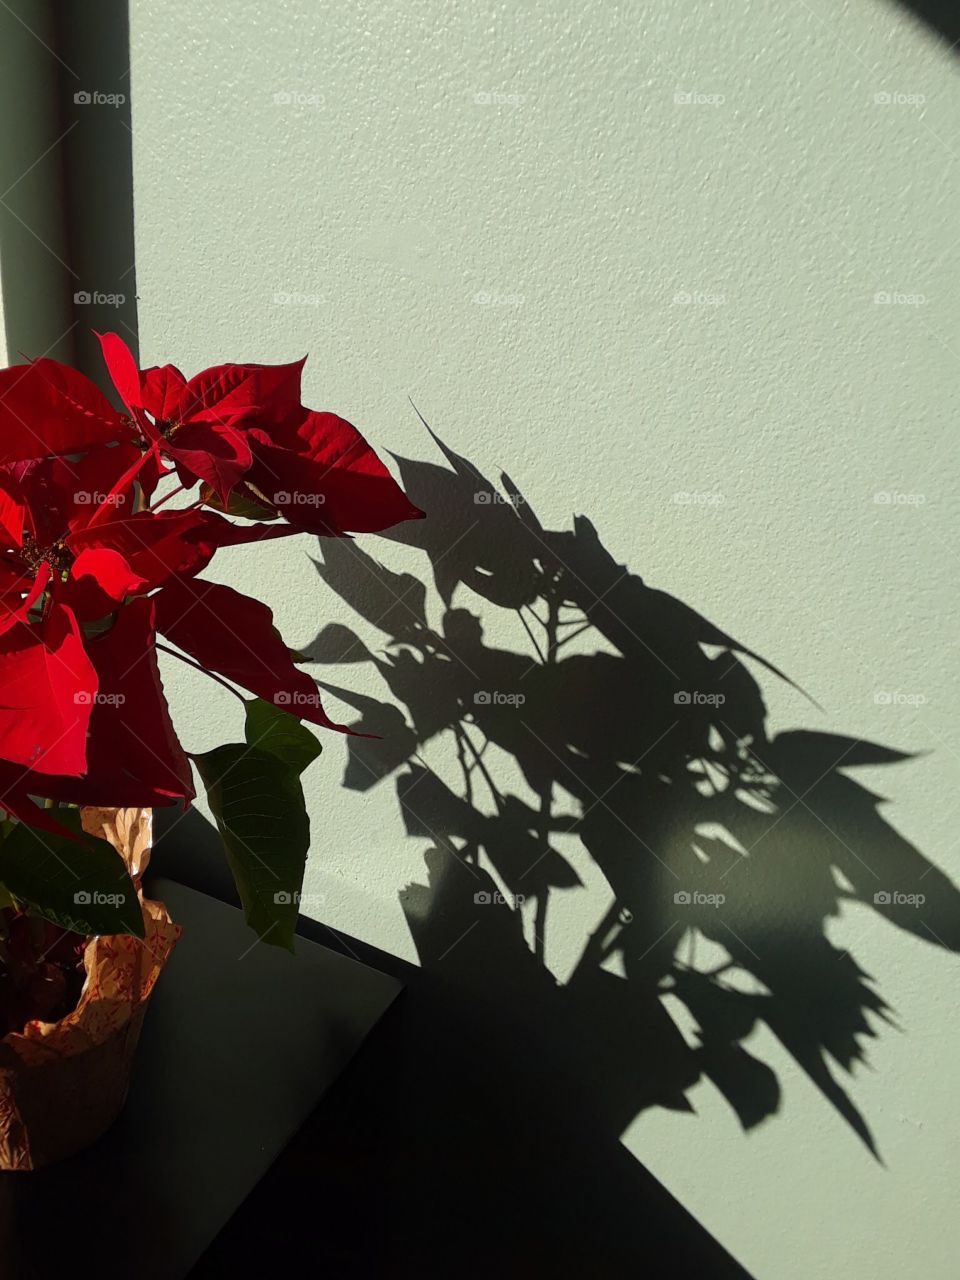 Poinsettia plant and its shadow on wall